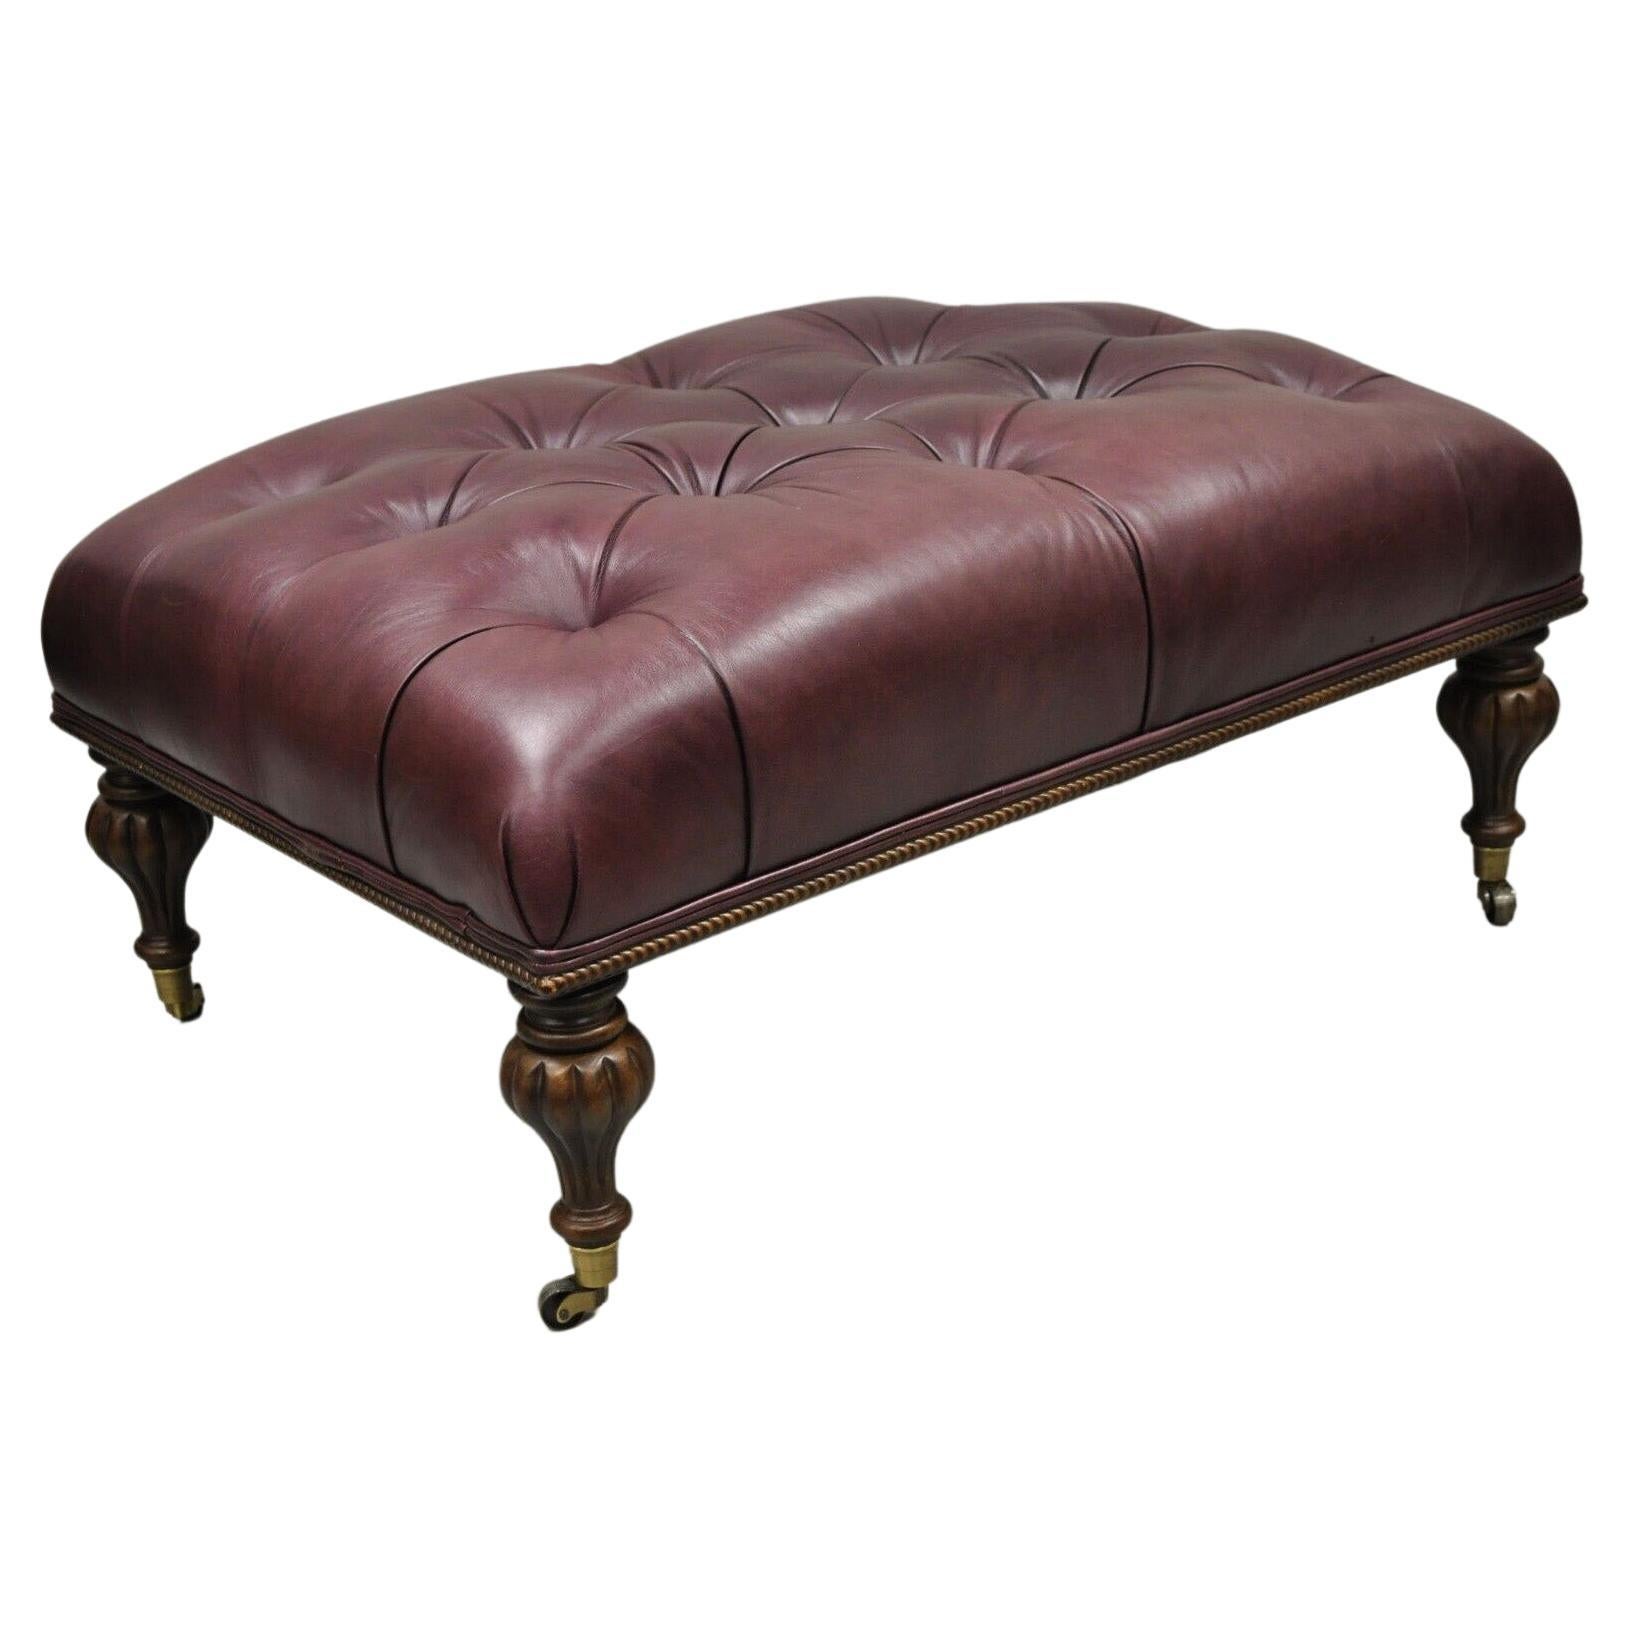 Burgundy Button Tufted Leather English Chesterfield Style Ottoman Footstool